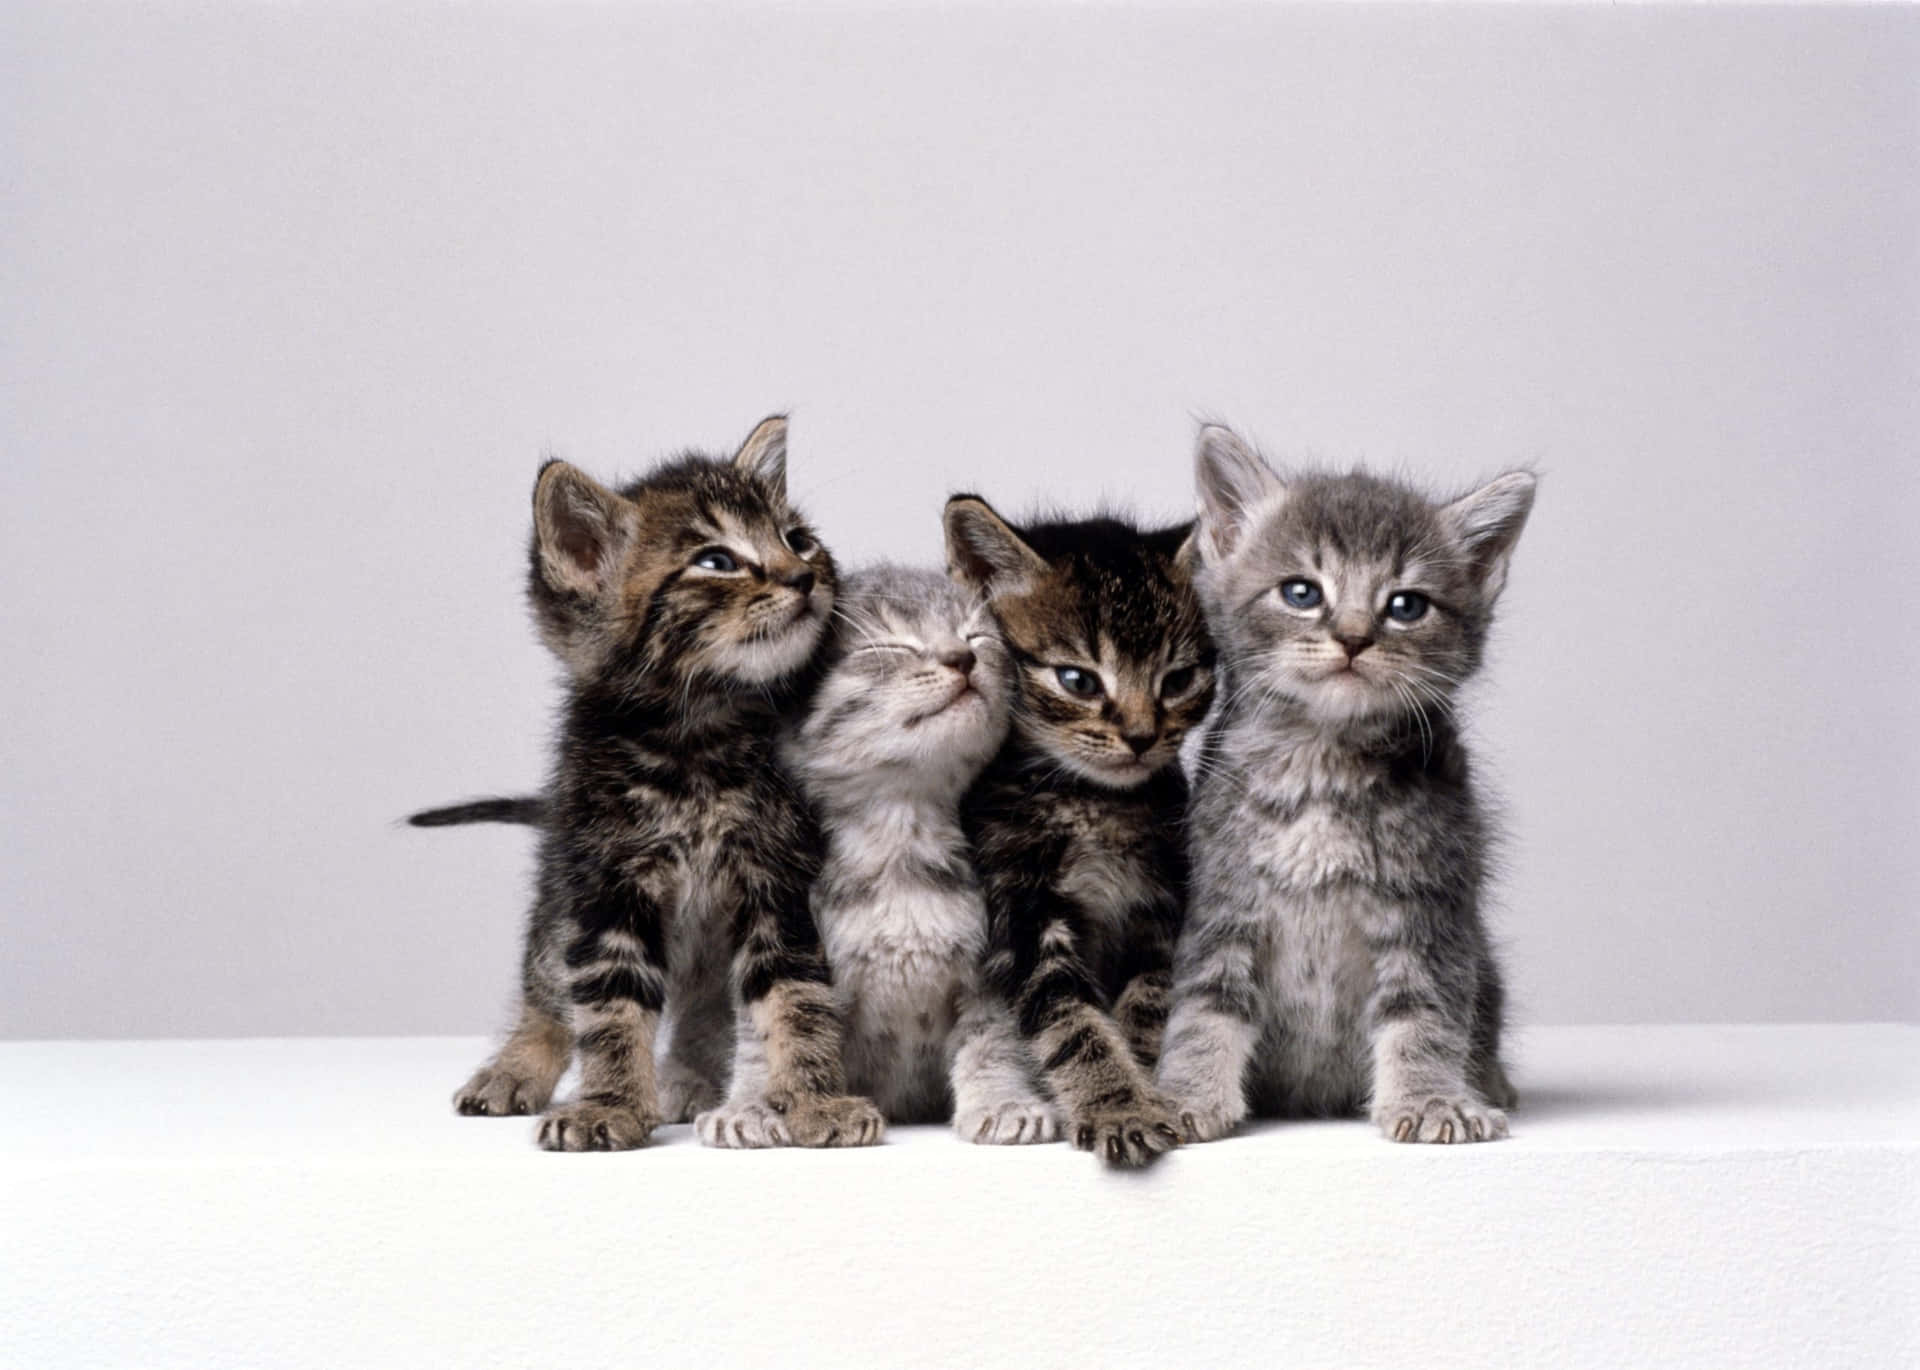 A Group Of Kittens Sitting On A White Surface